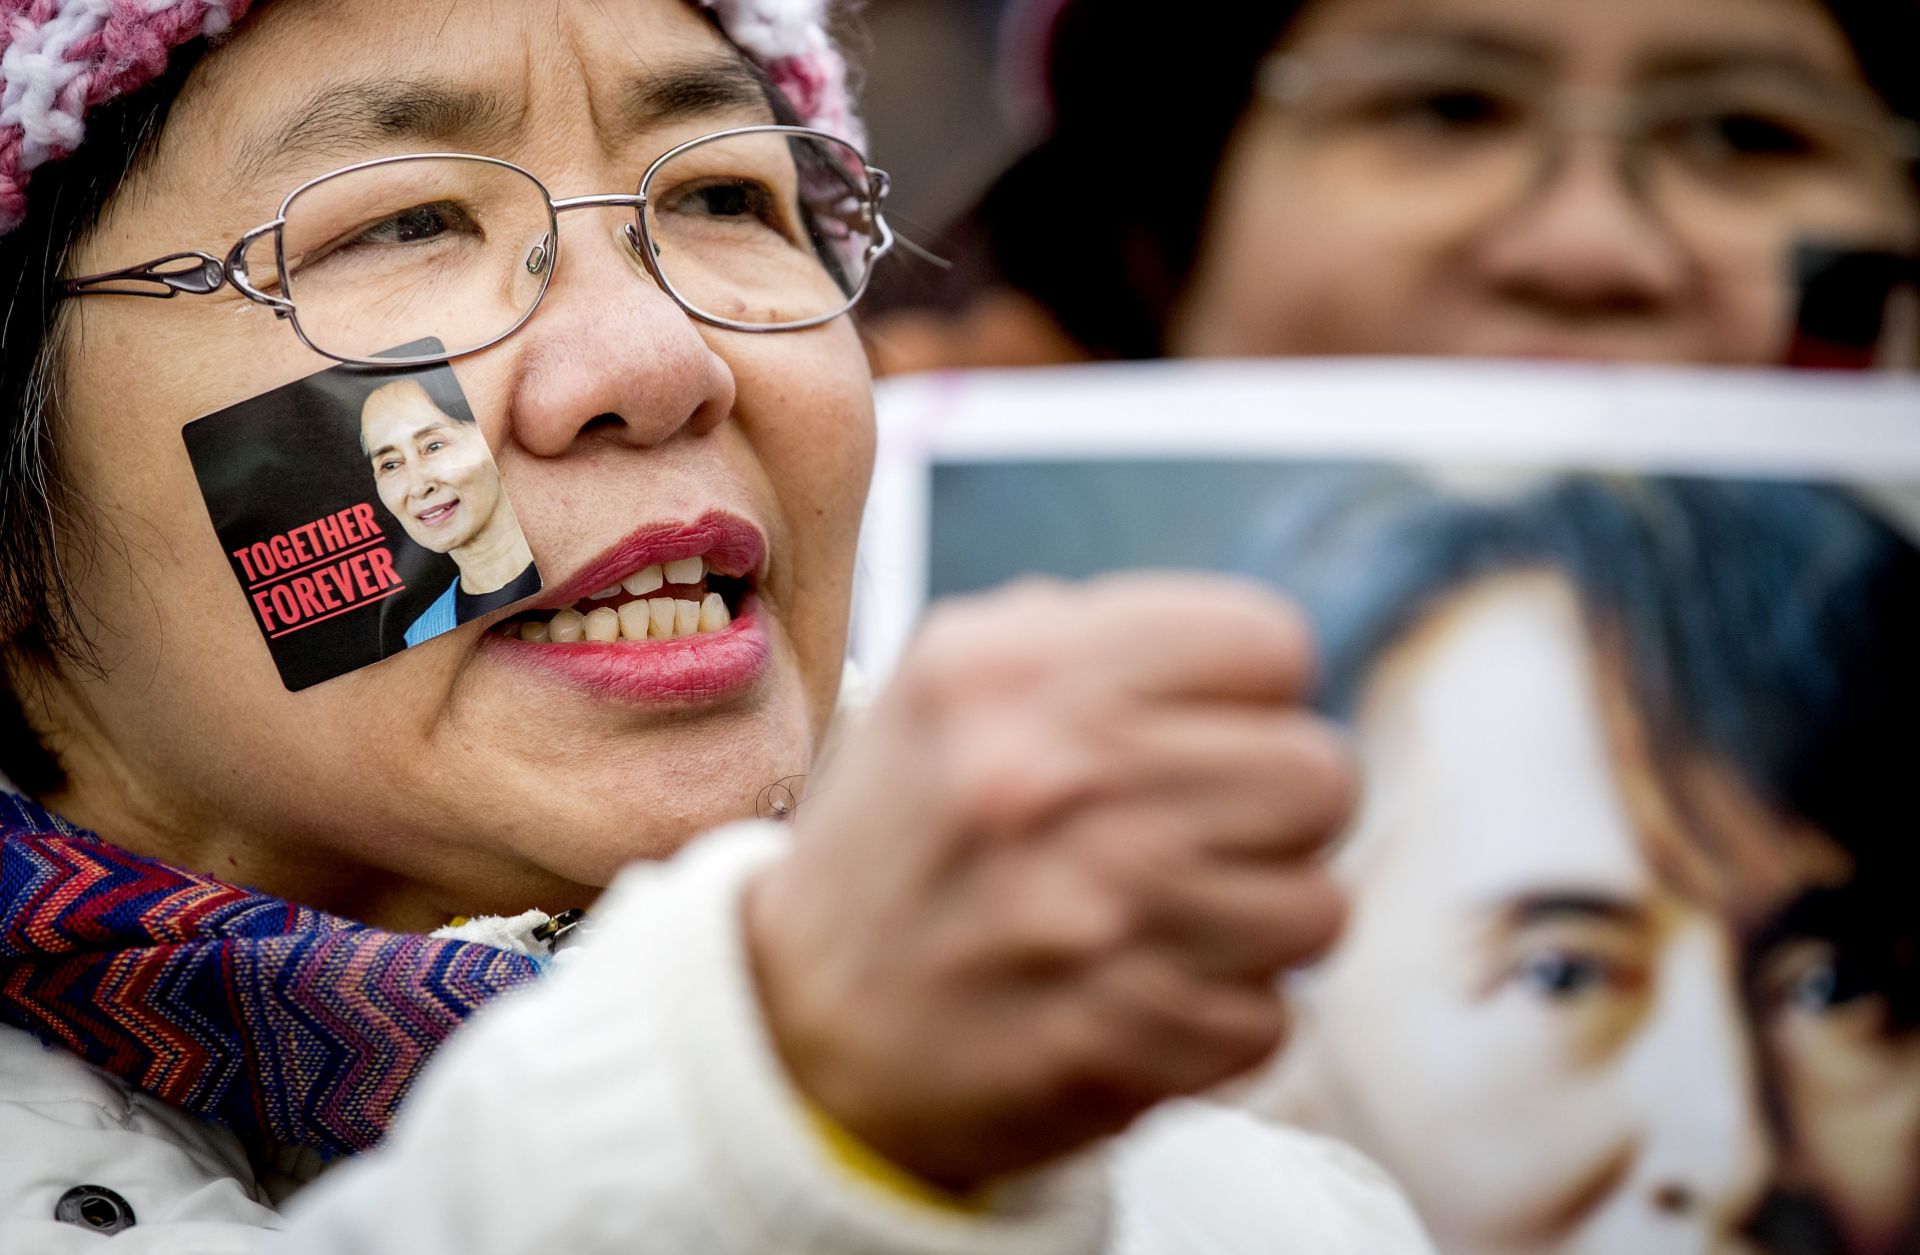 Supporters of Aung San Suu Kyi gather in The Hague, Netherlands, as the 1991 Nobel Peace Prize laureate defended Myanmar's military against allegations of ethnic cleansing and genocide before the International Court of Justice on Dec. 12, 2019.